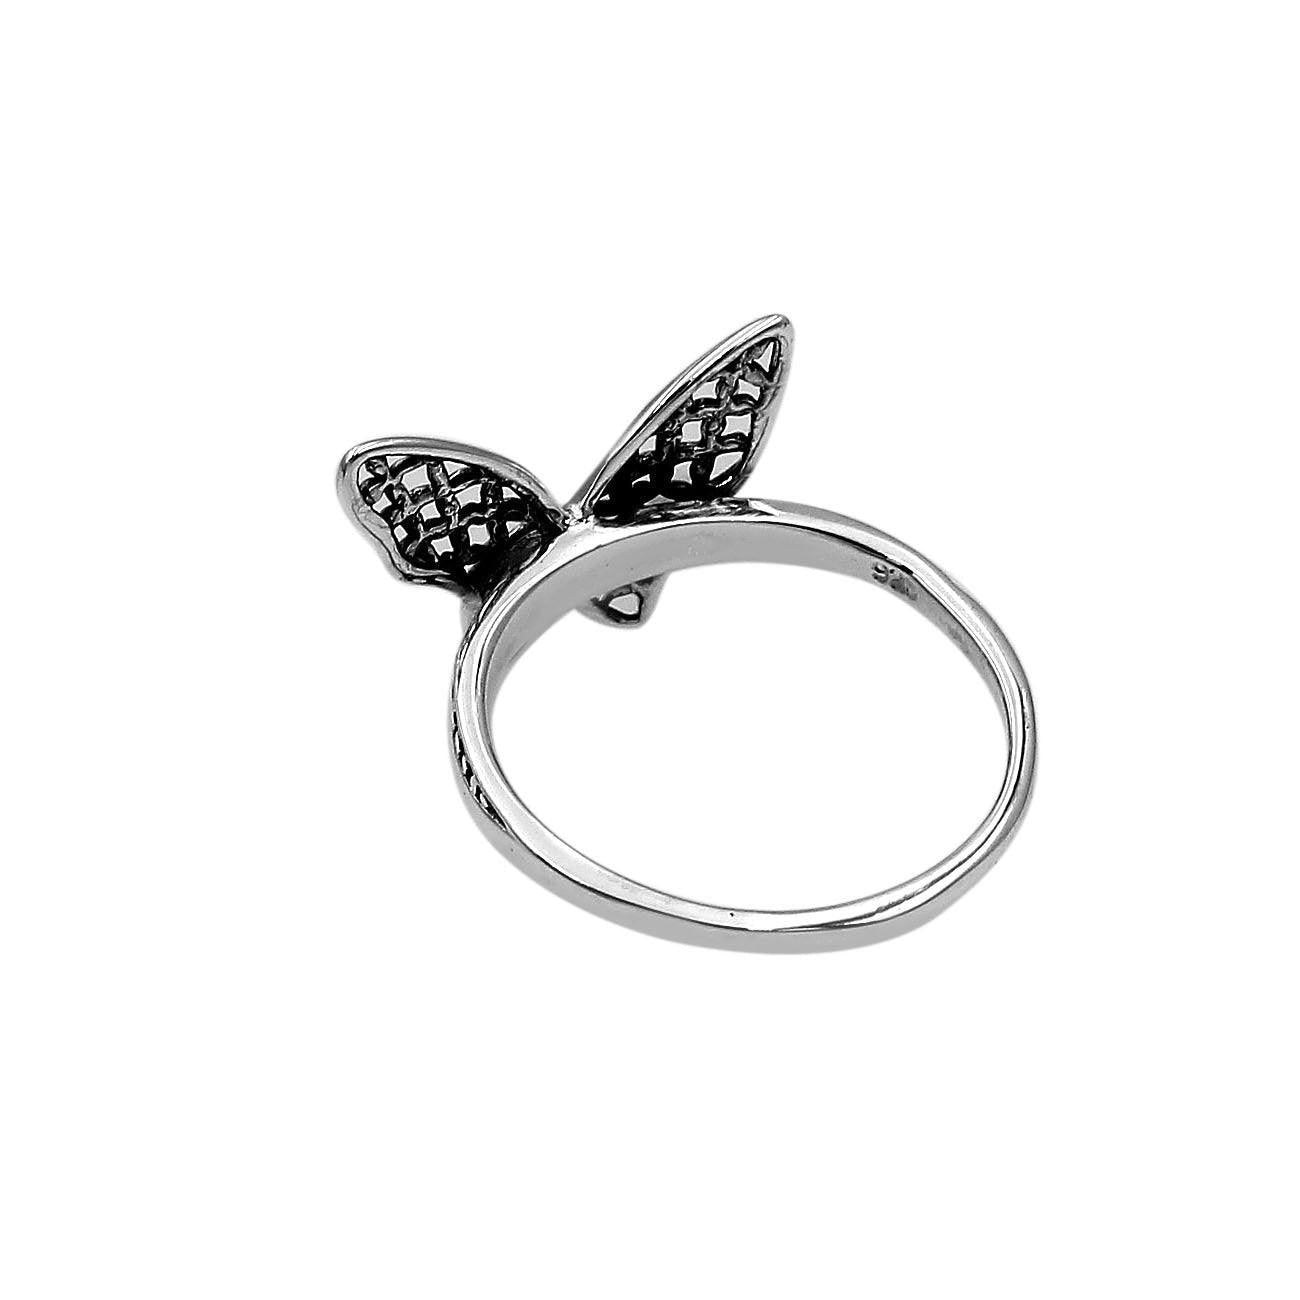 Handmade Butterfly Luck Hope Ring in 925 Sterling Silver Size L , M , N , O , P , Q - Inspiring Jewellery